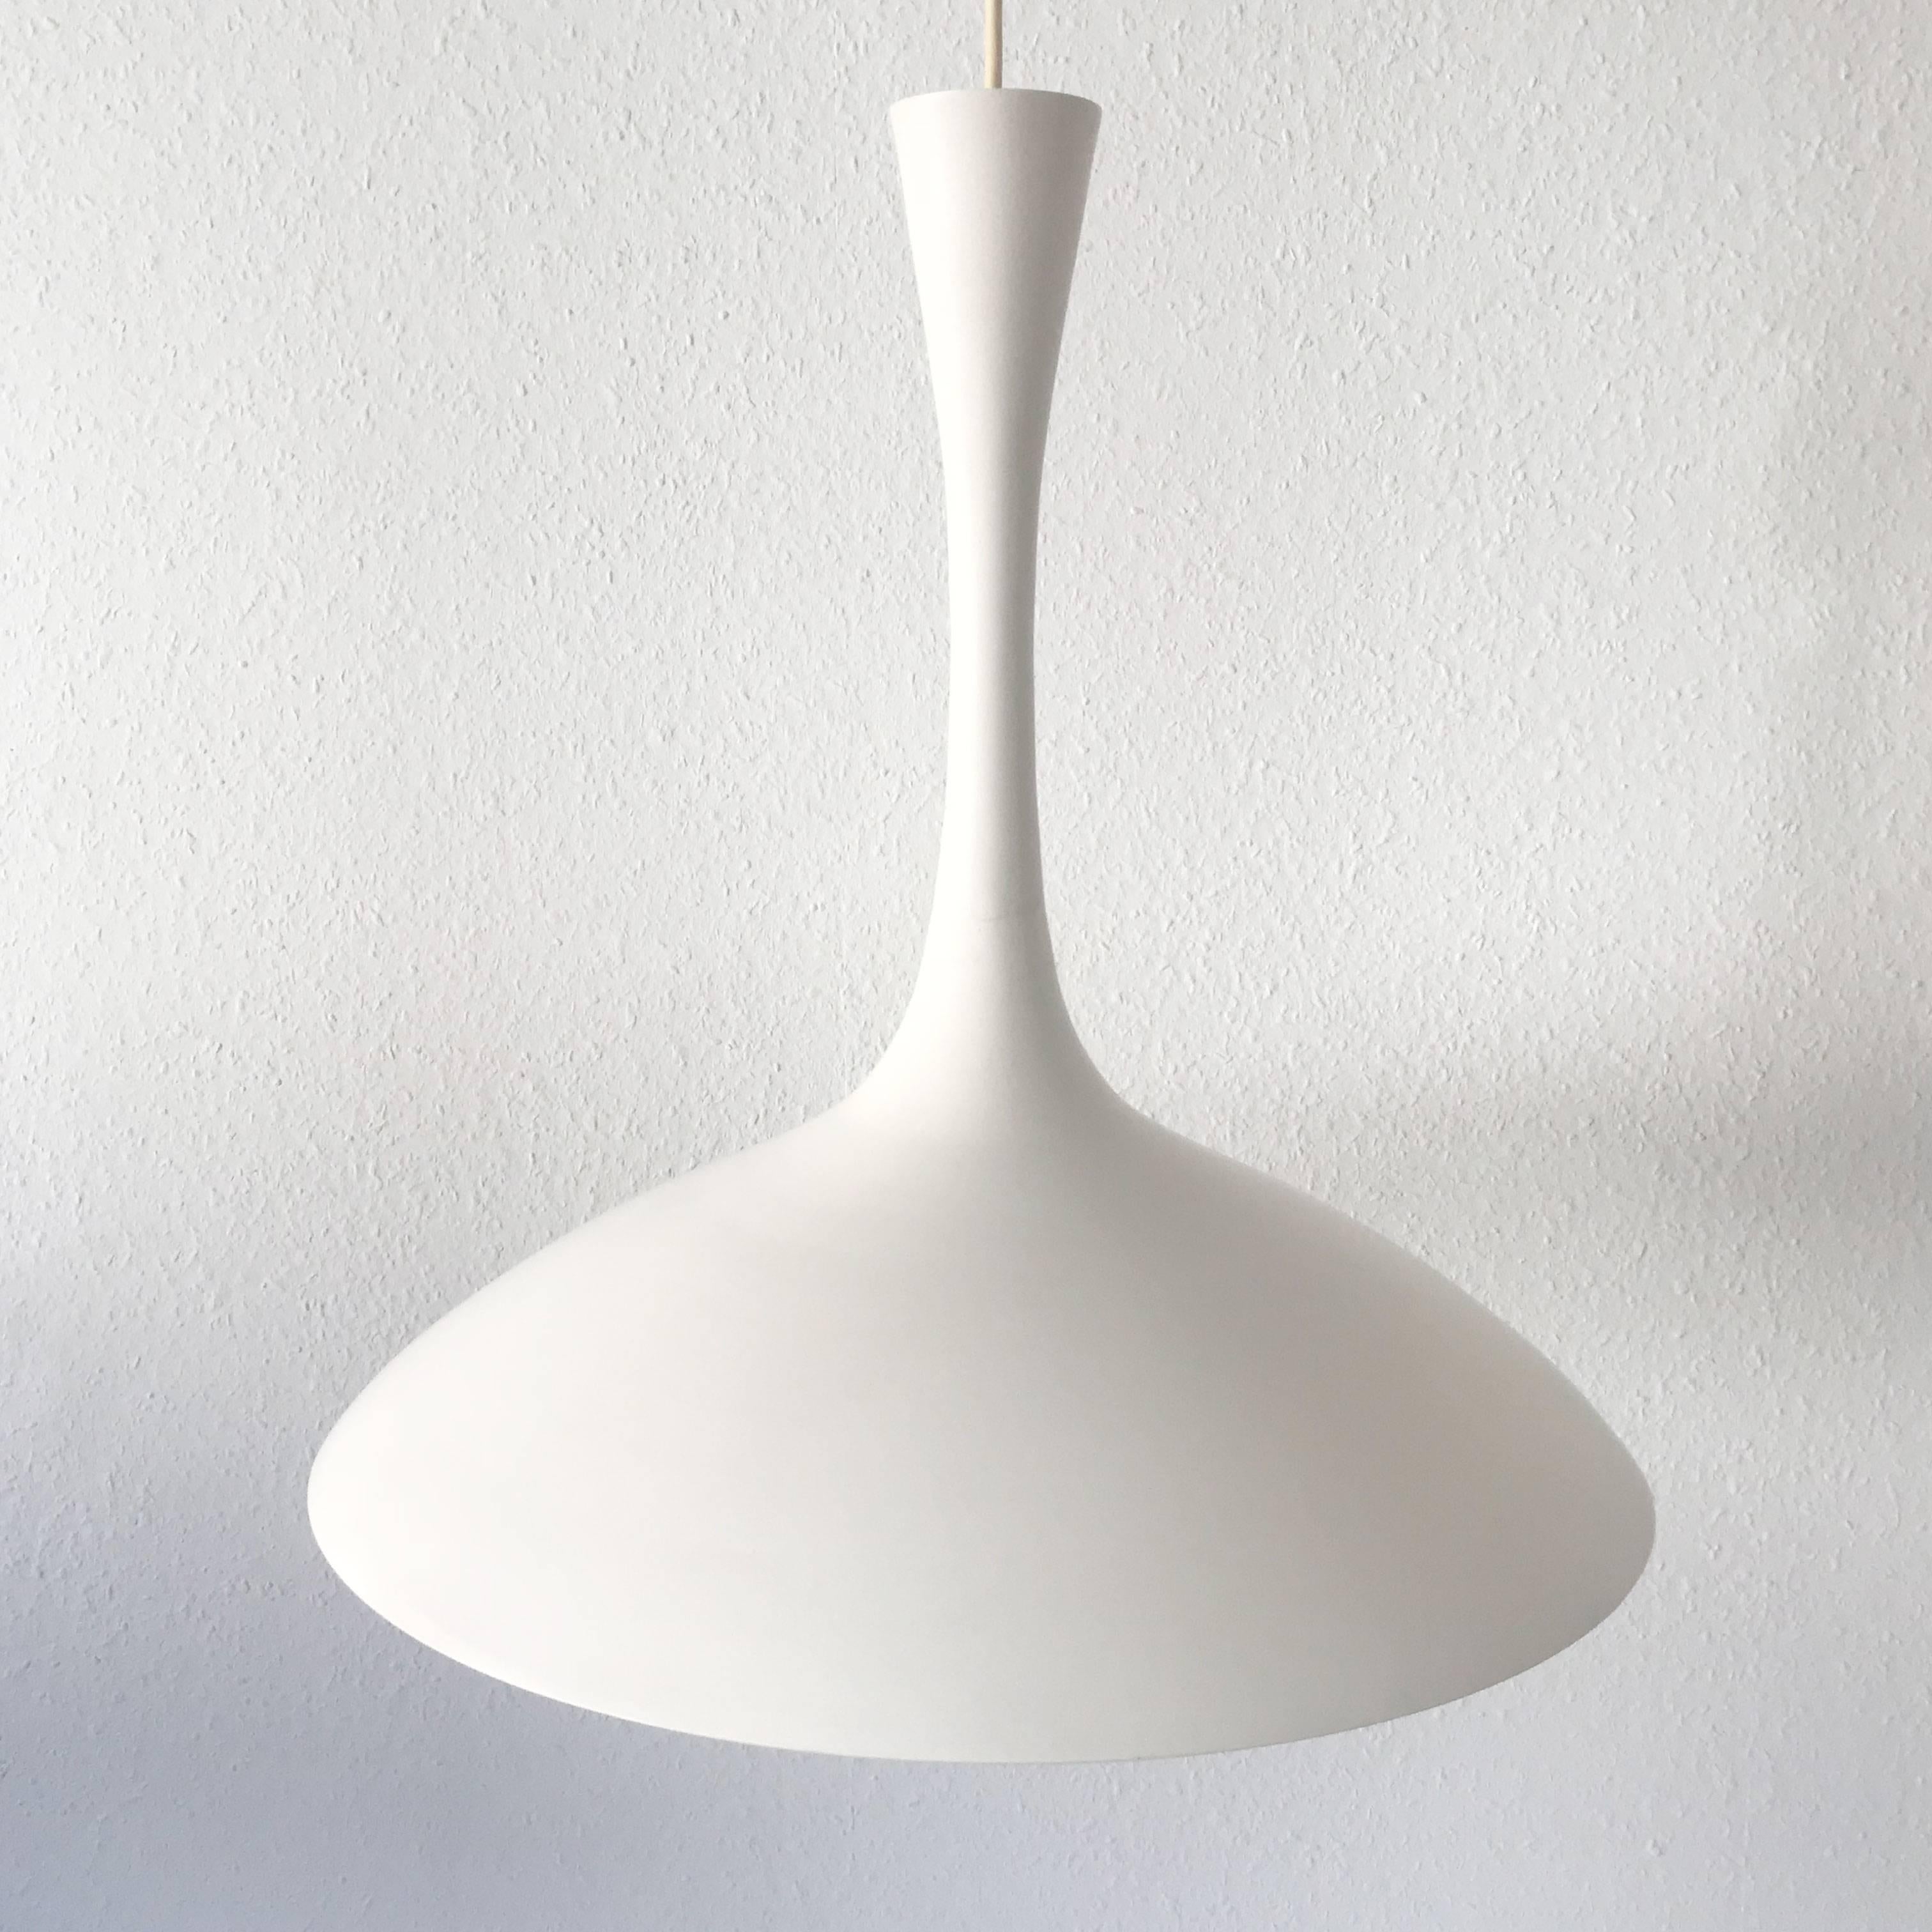 Elegant Mid Century Modern Pendant Lamp or Hanging Light by Florian Schulz 1960s In Good Condition For Sale In Munich, DE